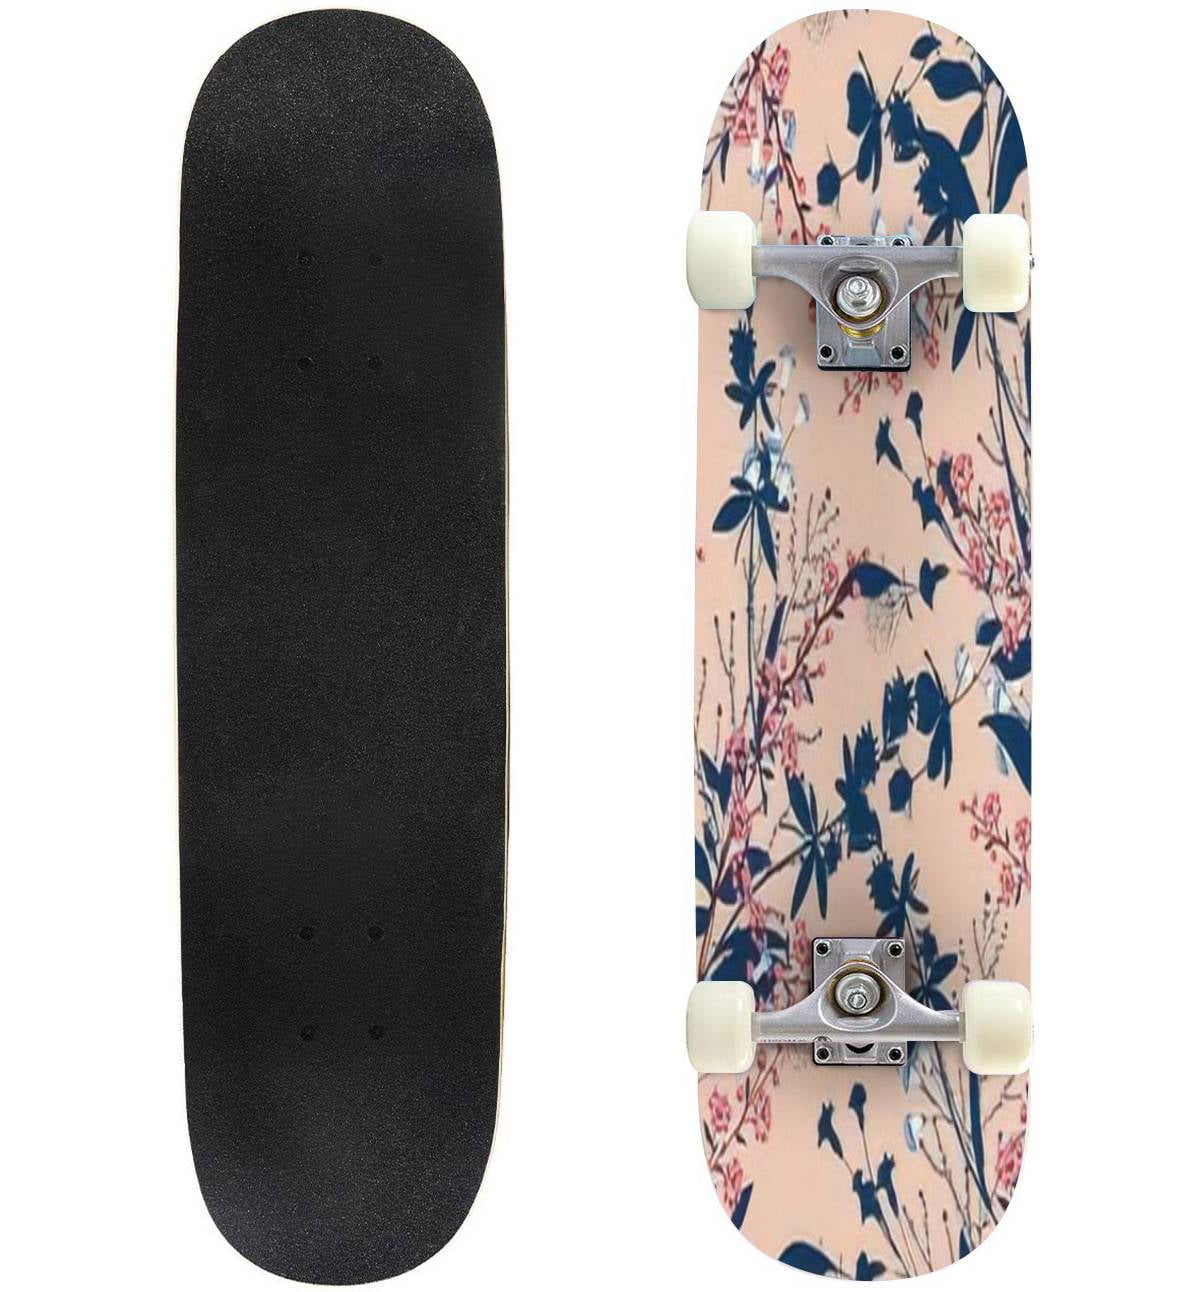 Trendy Floral pattern in the many kind of flowers Tropical Outdoor 31"x8" Pro Complete Skate Board Cruiser - Walmart.com